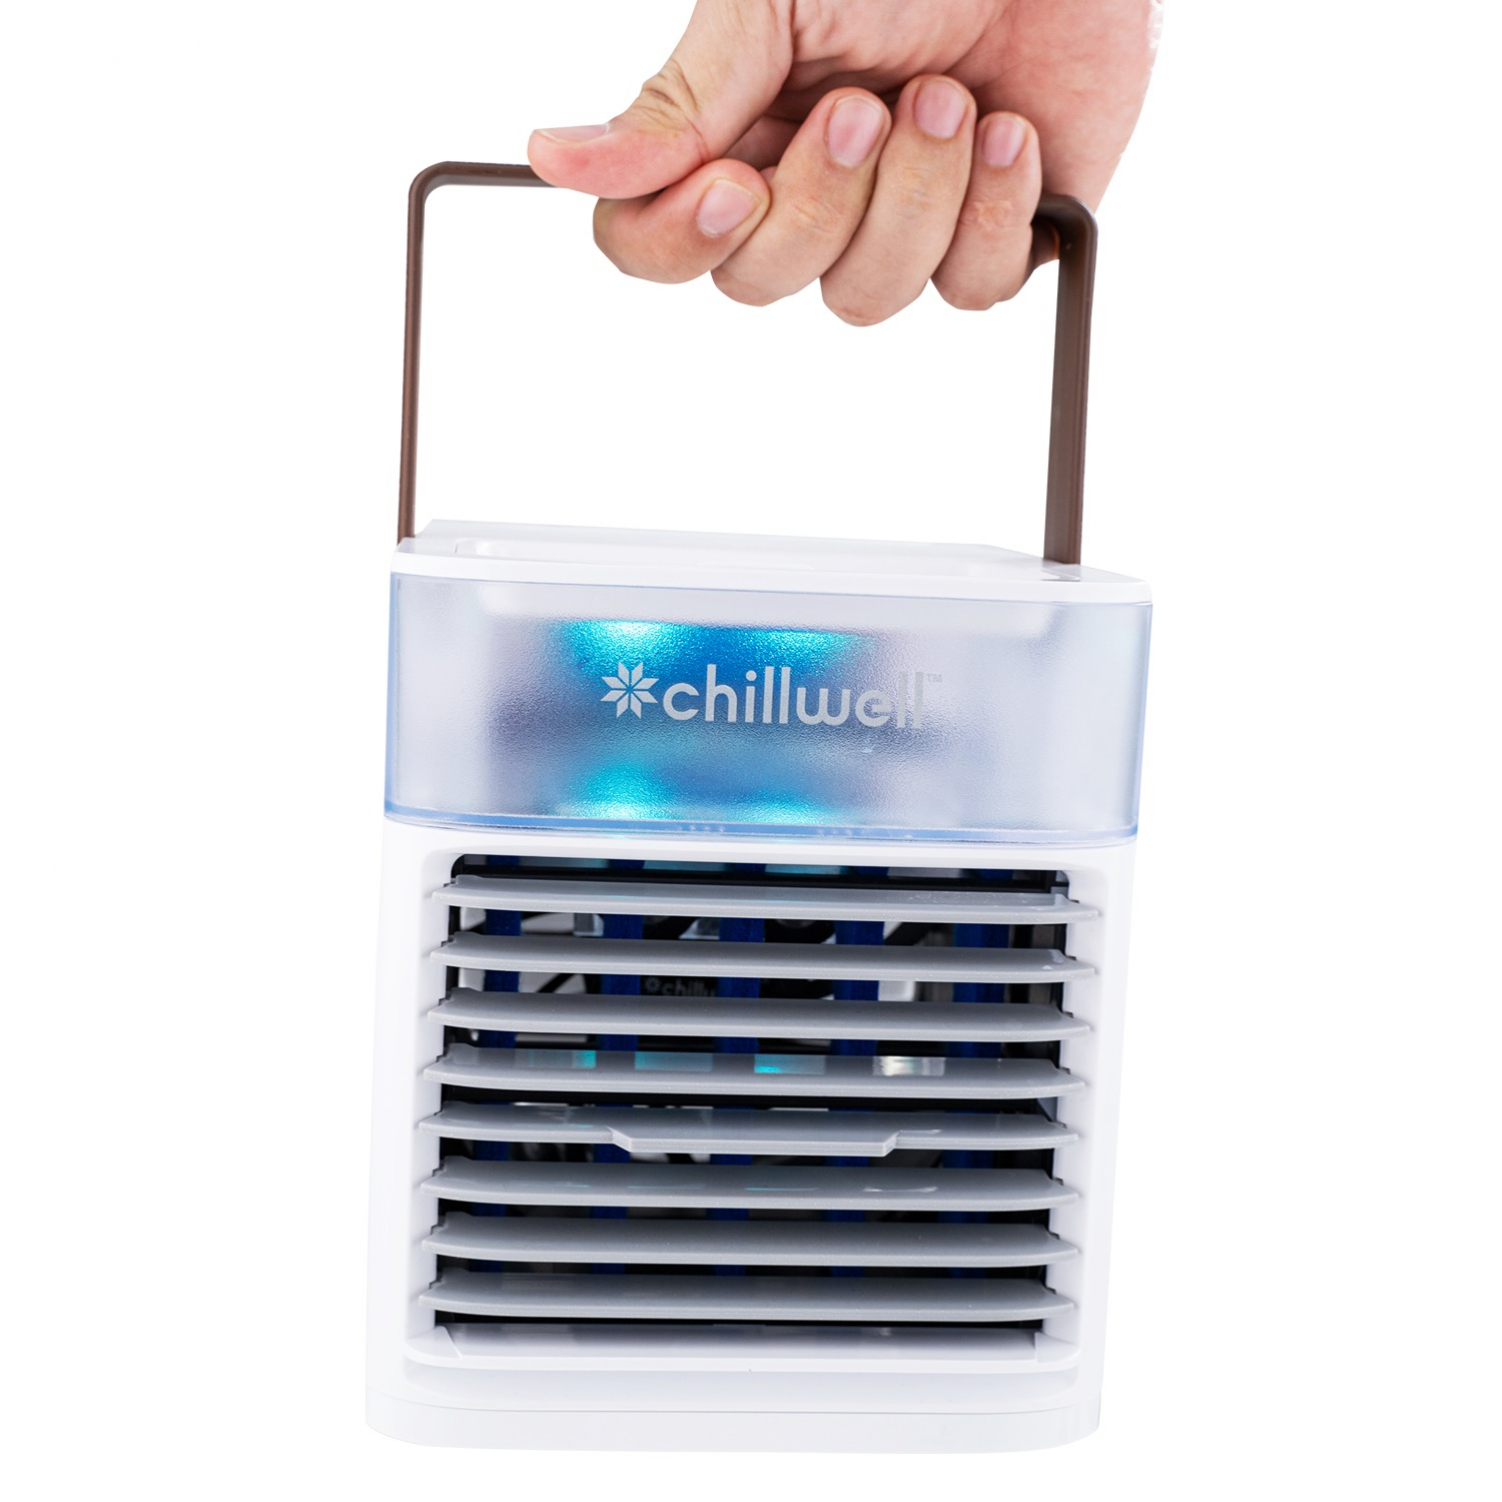 Chillwell AC In Store Near Me